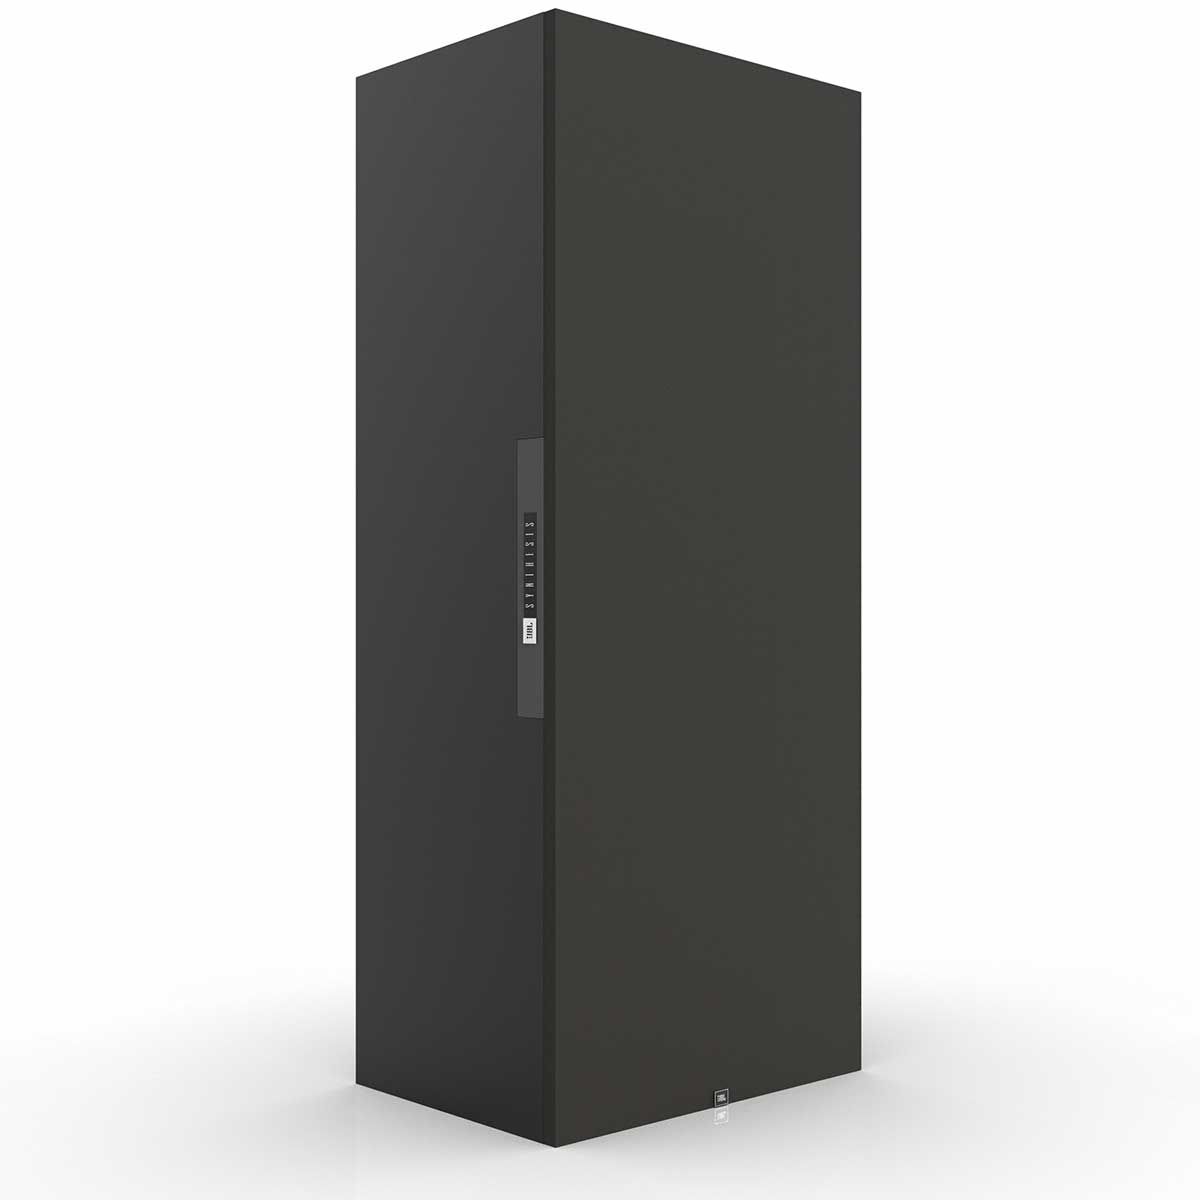 JBL Synthesis SCL-1 2-Way LCR Home Theater Speaker, Black, front angle with grille